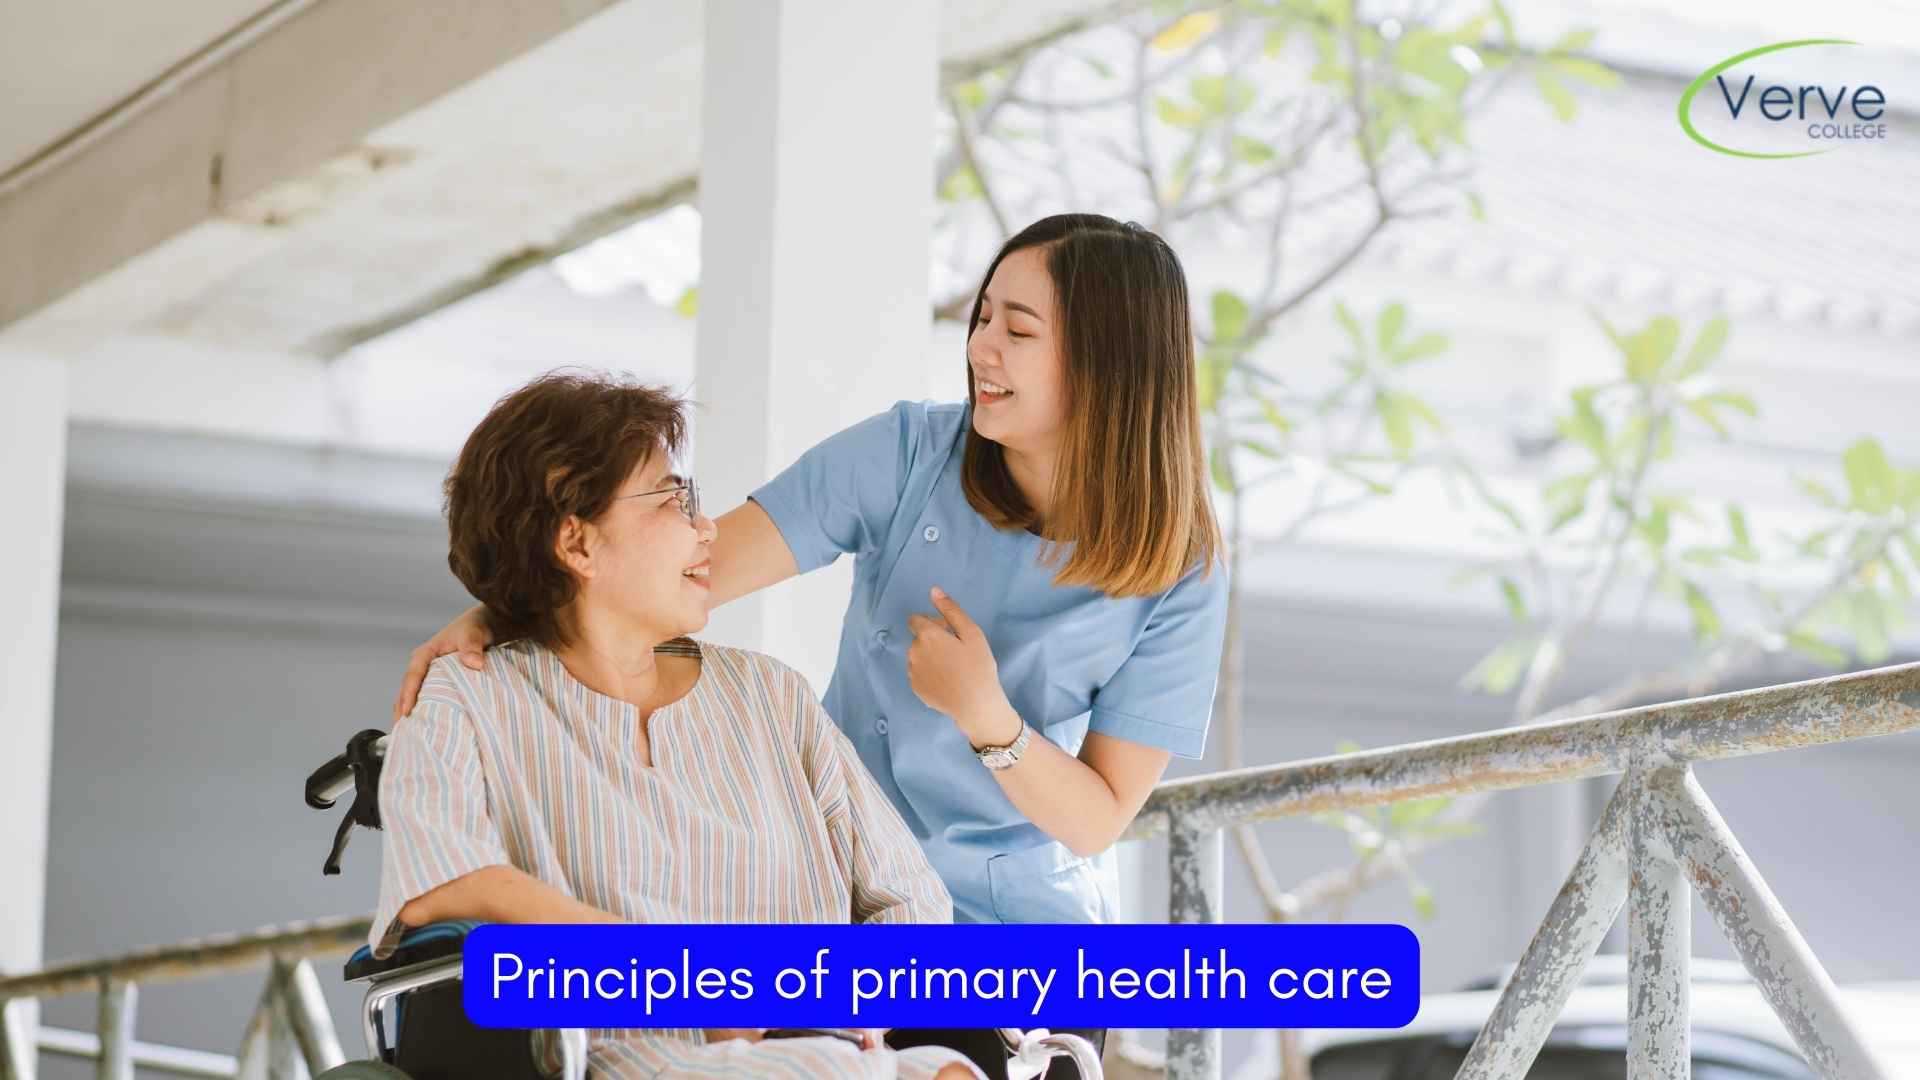 Primary Health Care: Their Principles